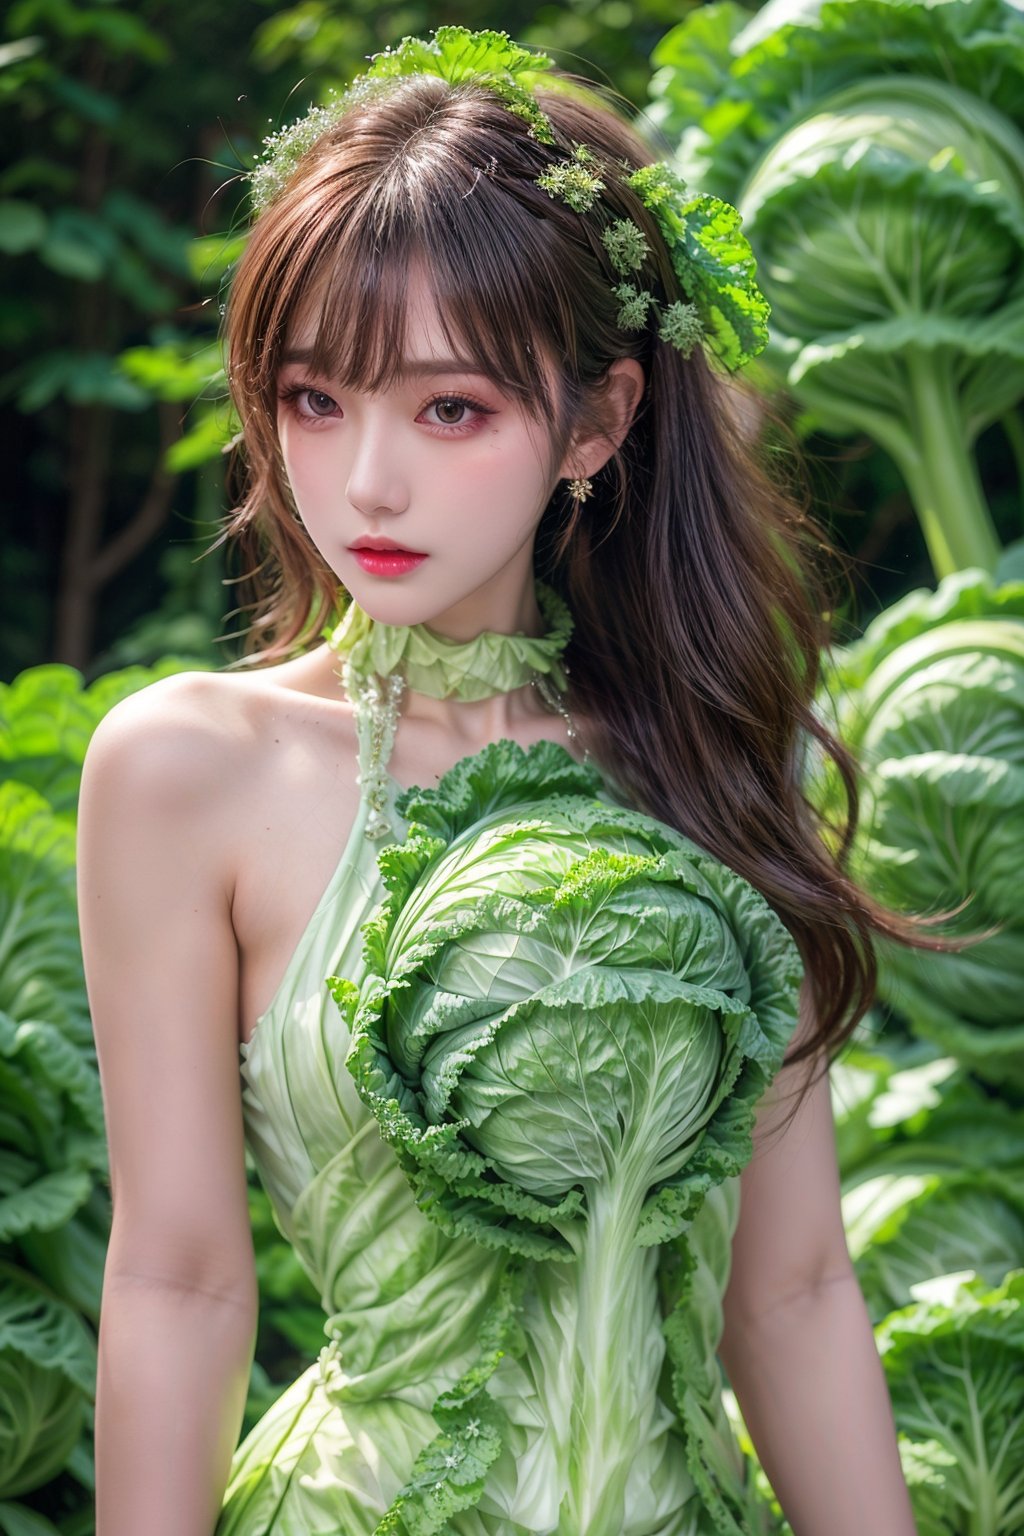 Canon RF85mm f/1.2,masterpiece,best quality,ultra highres,1 girl,standing,long legs,(korean mixed,kpop idol:1.2),solo,realistic hand,very white skin,black eyes,necklace,long_brown_wavy_ hair,red lips,eyelashes,bangs,make-up,shiny lips,Pore,skin texture,jewelry,bracelet,big breasts,((white_skinny_seifuku:1.5),(cabbage dress:1.5),(Botanical_garden_background:1.2))
